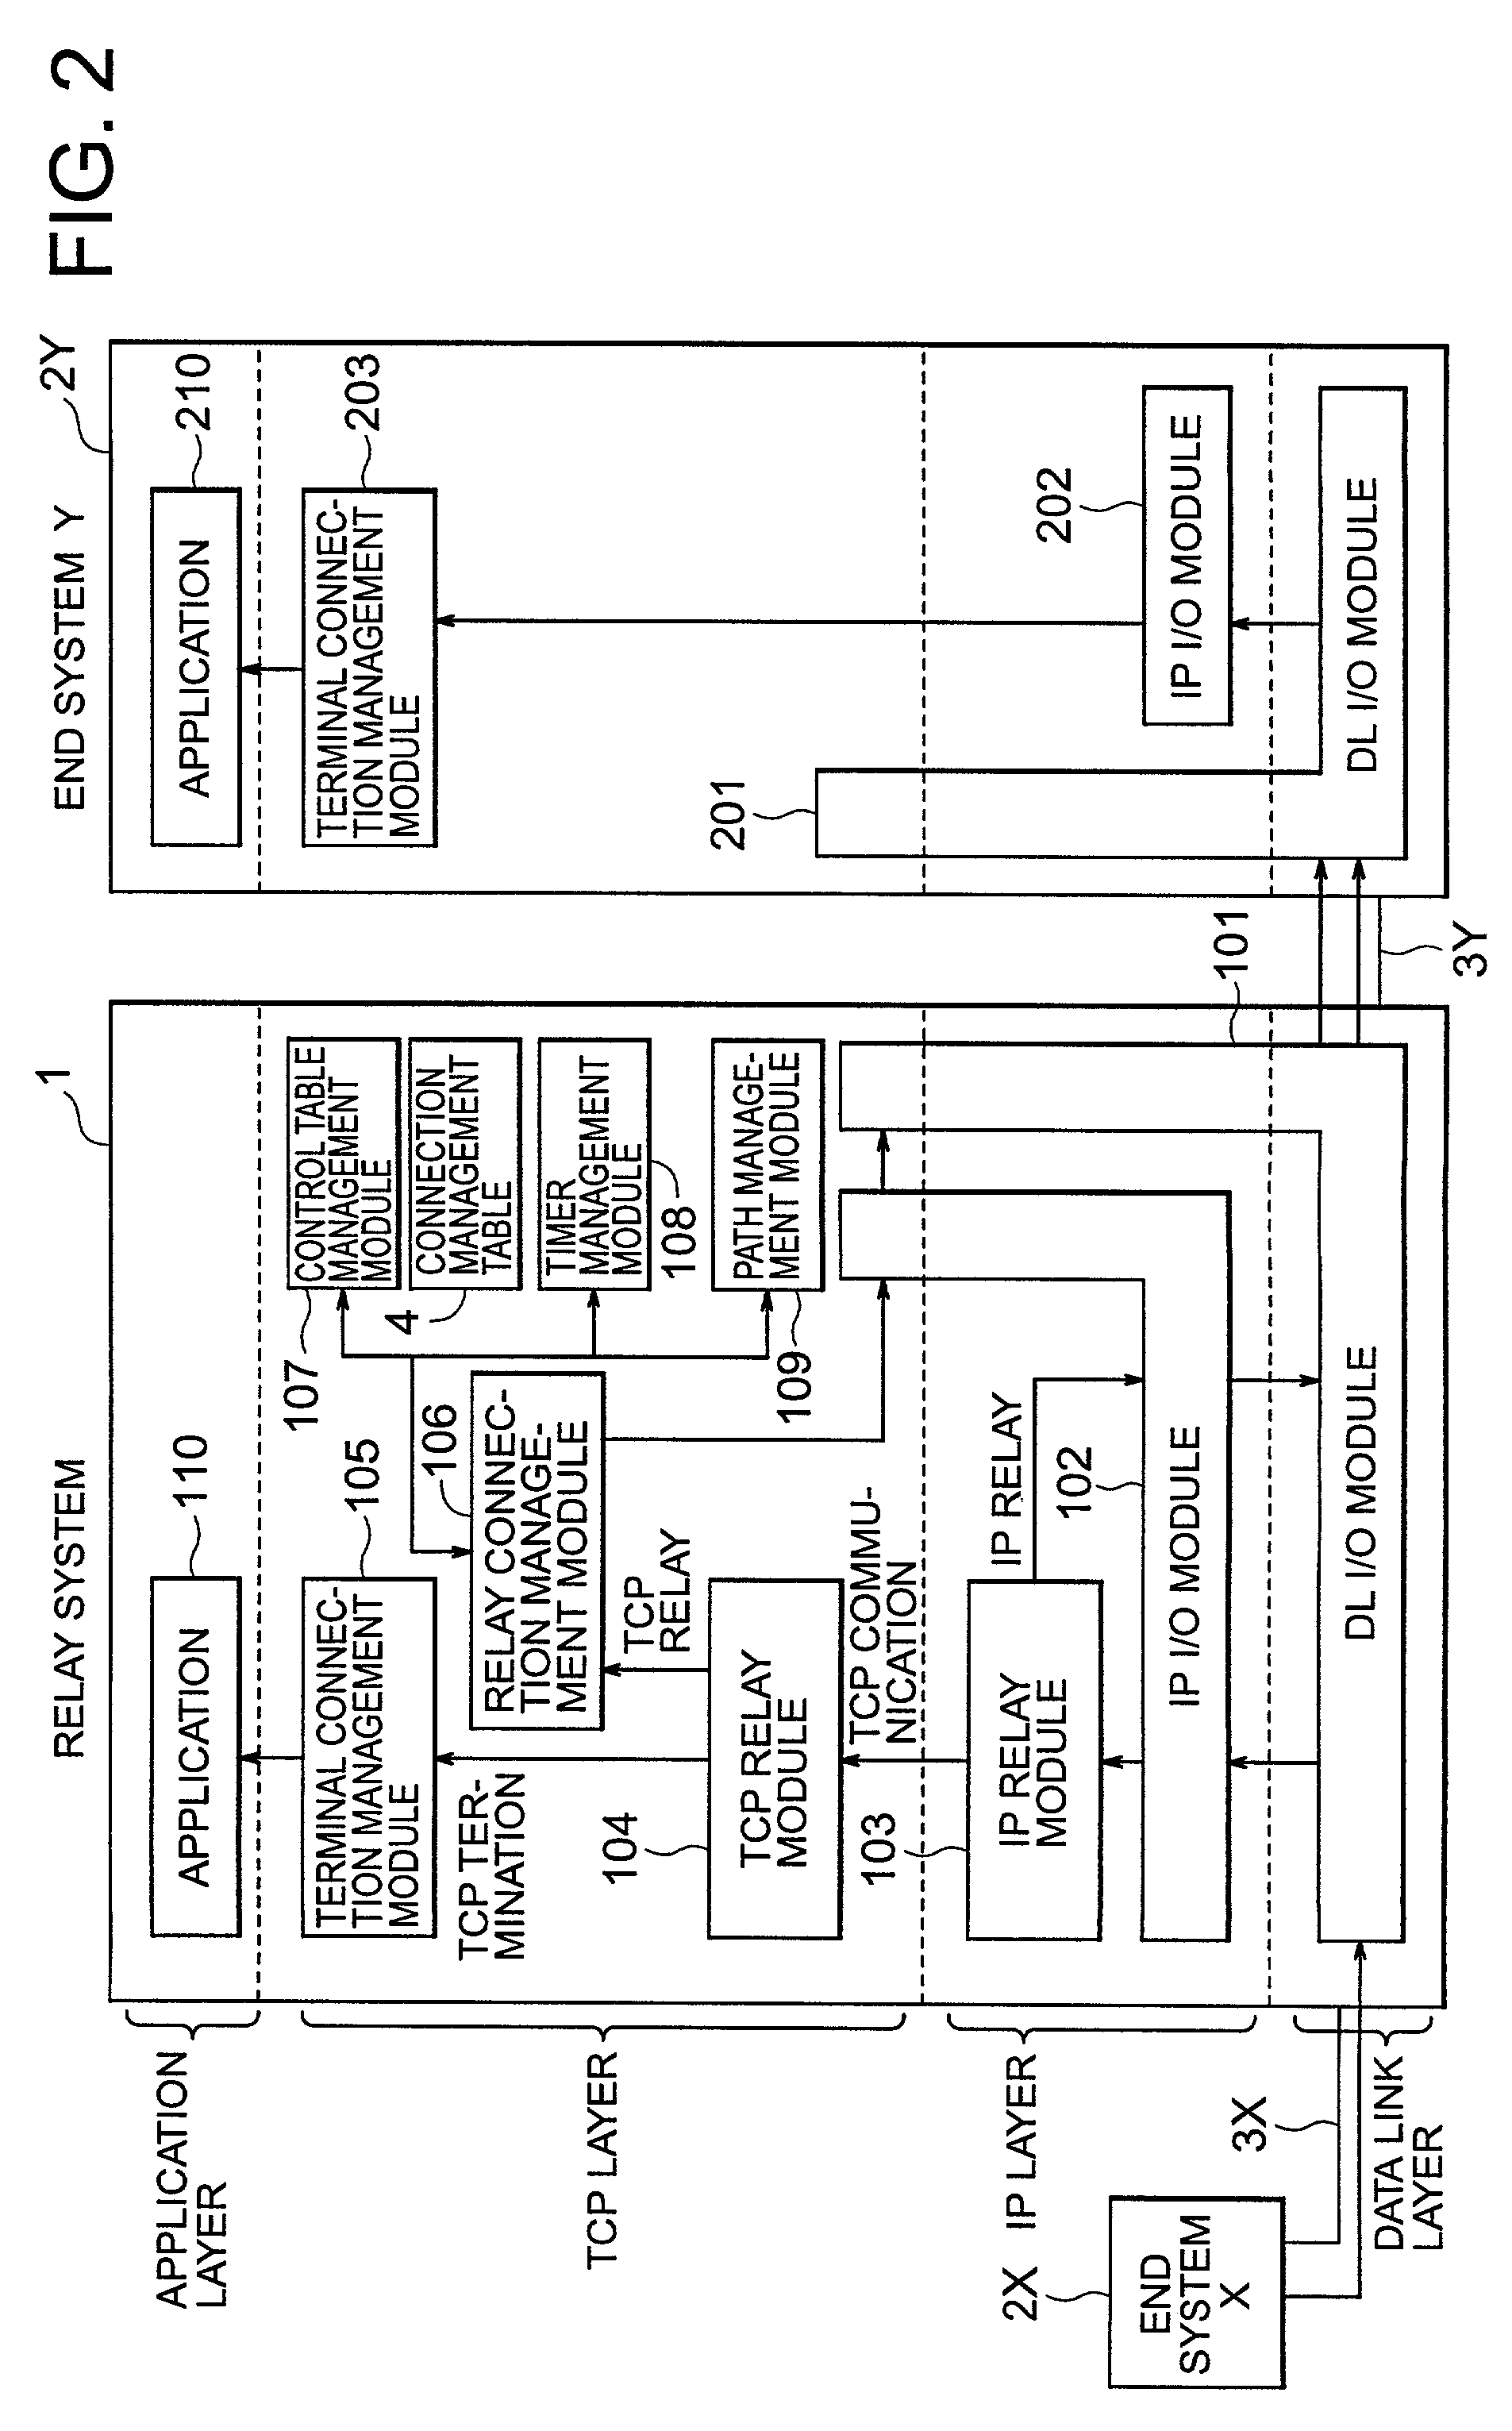 Relay connection management program, relay connection management method, relay connection management apparatus and recording medium which stores relay connection management program